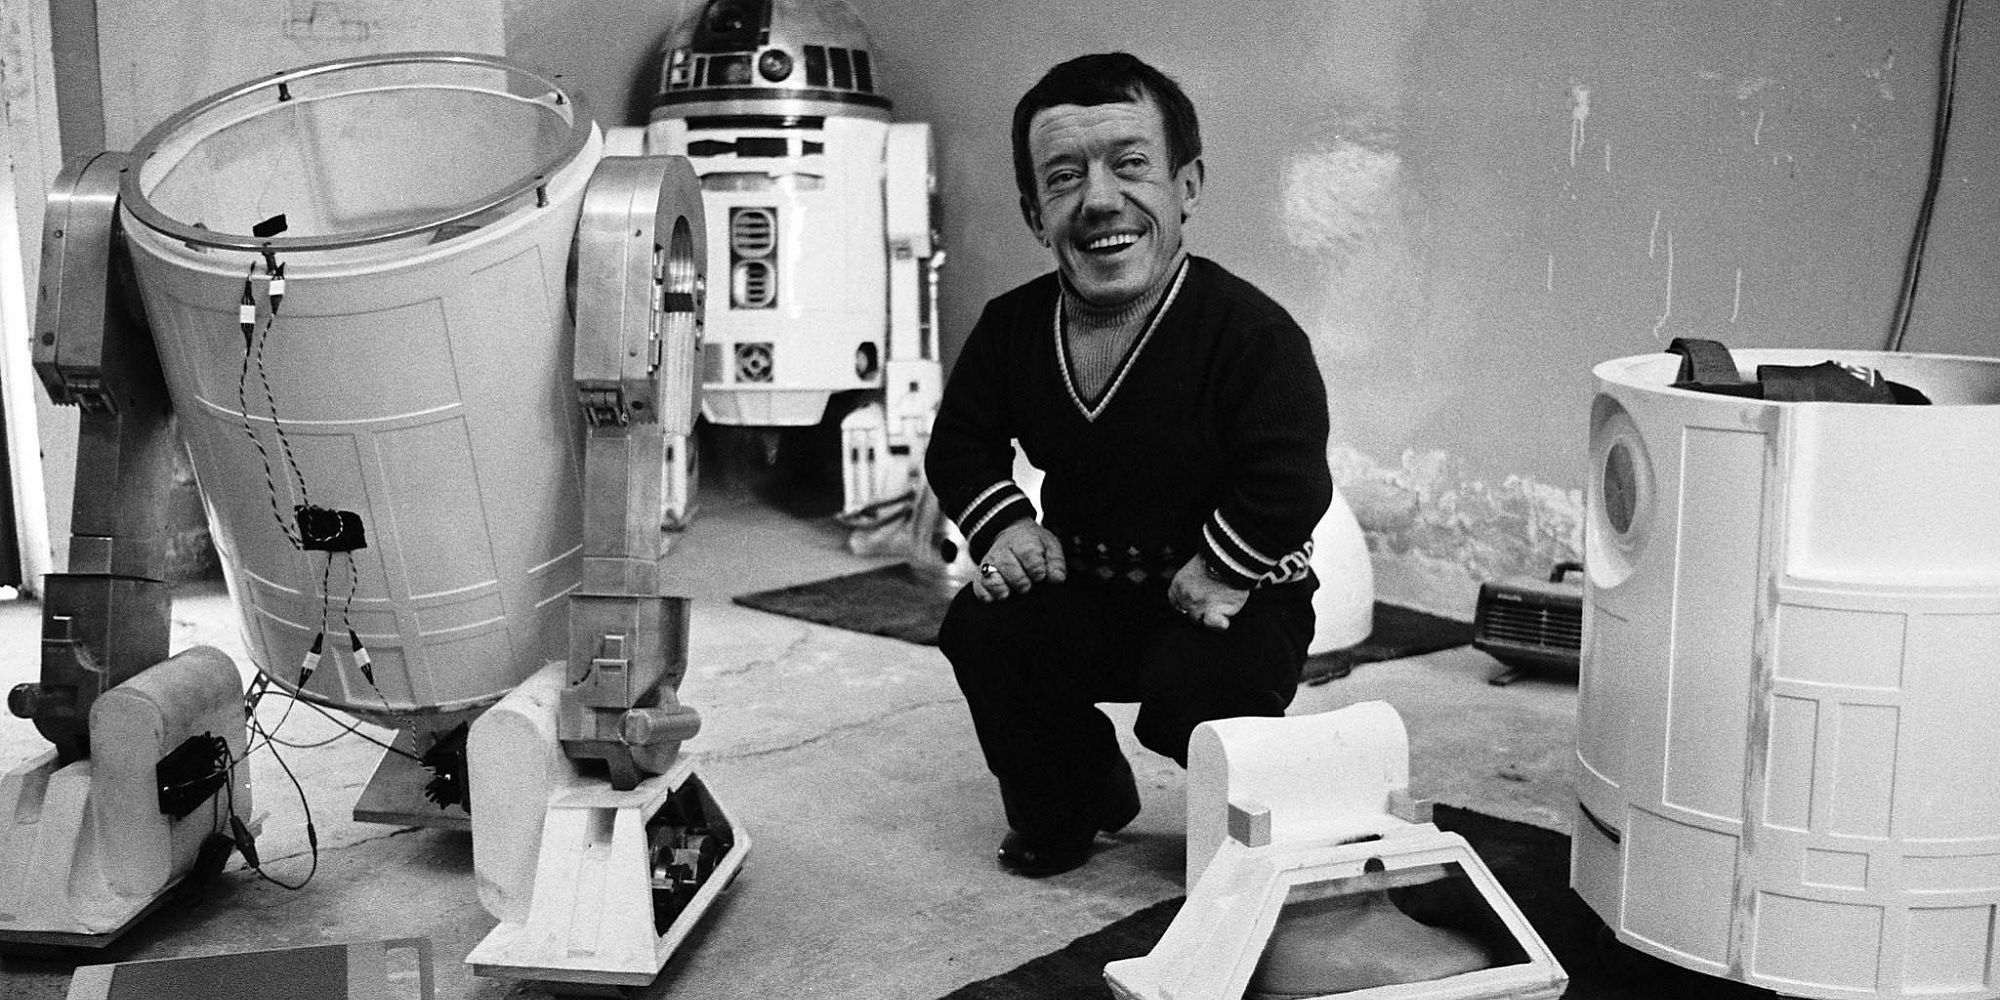 Kenny Baker with R2-D2 costume